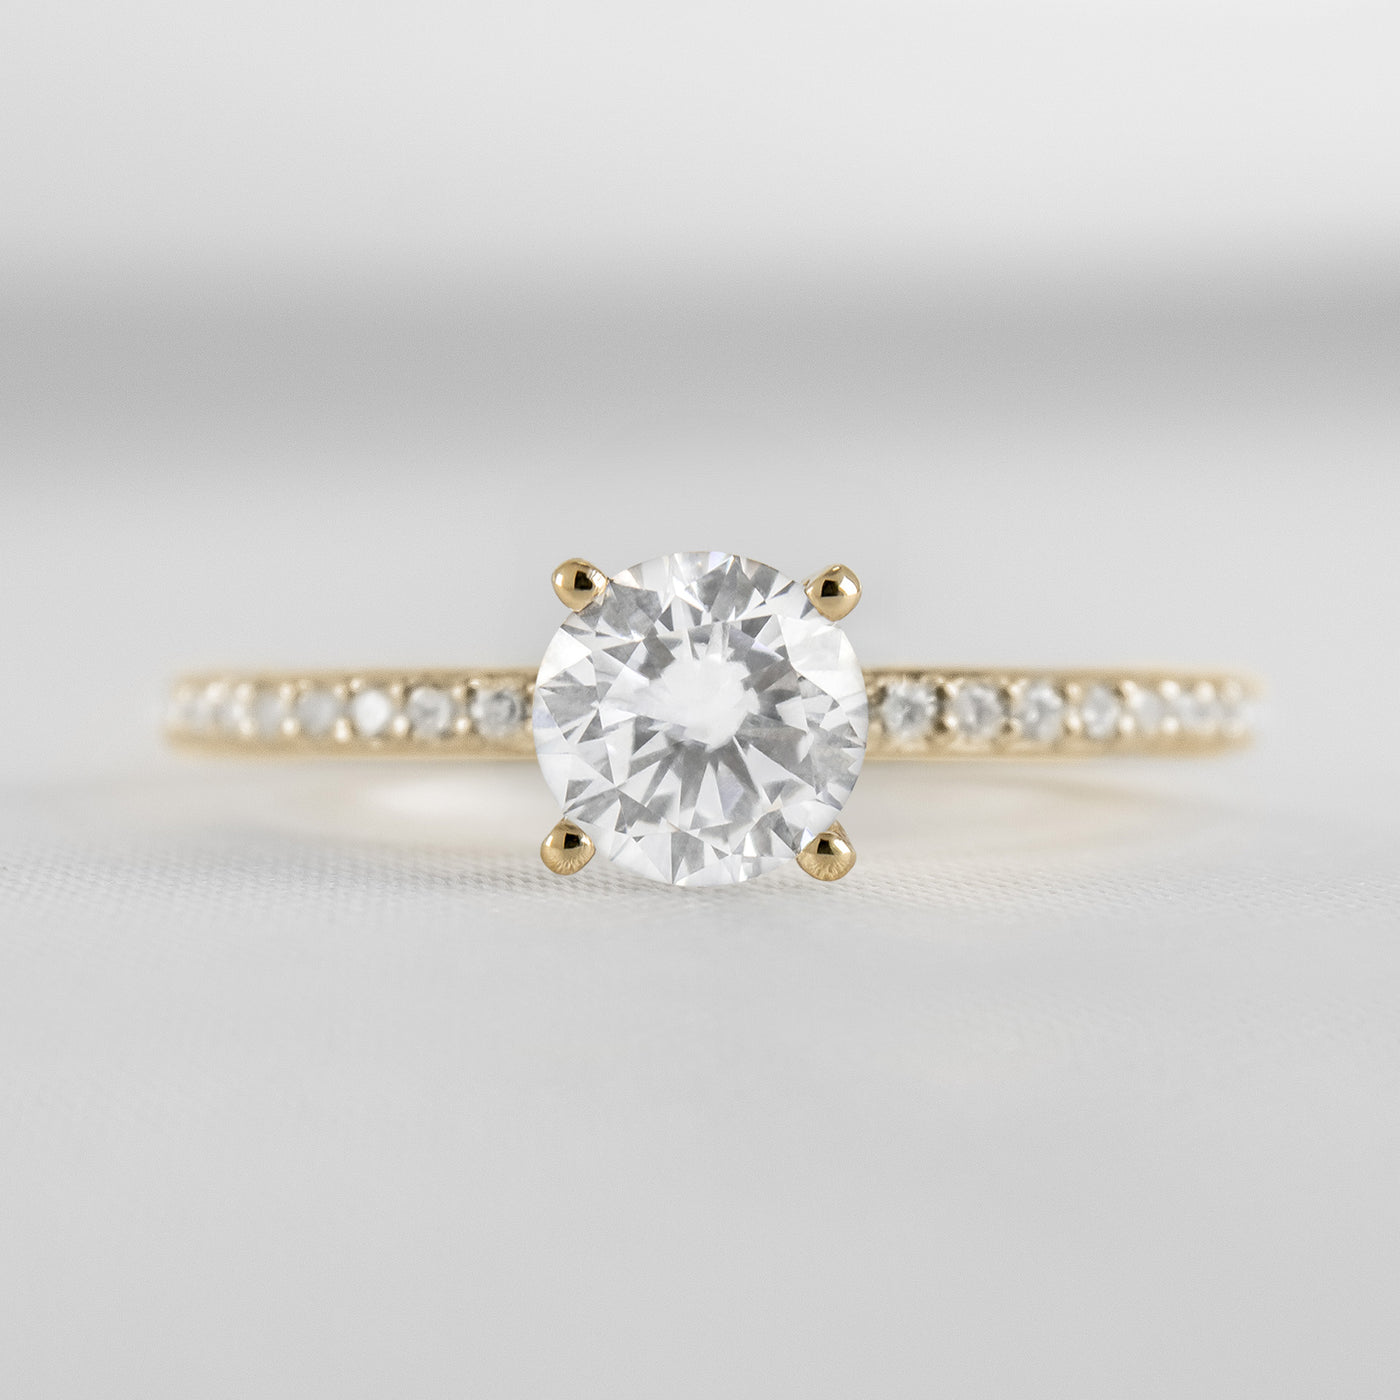 Shown in 1.0 Carat * Diamond Pavé Solitaire Engagement Ring | Lisa Robin#shape_round